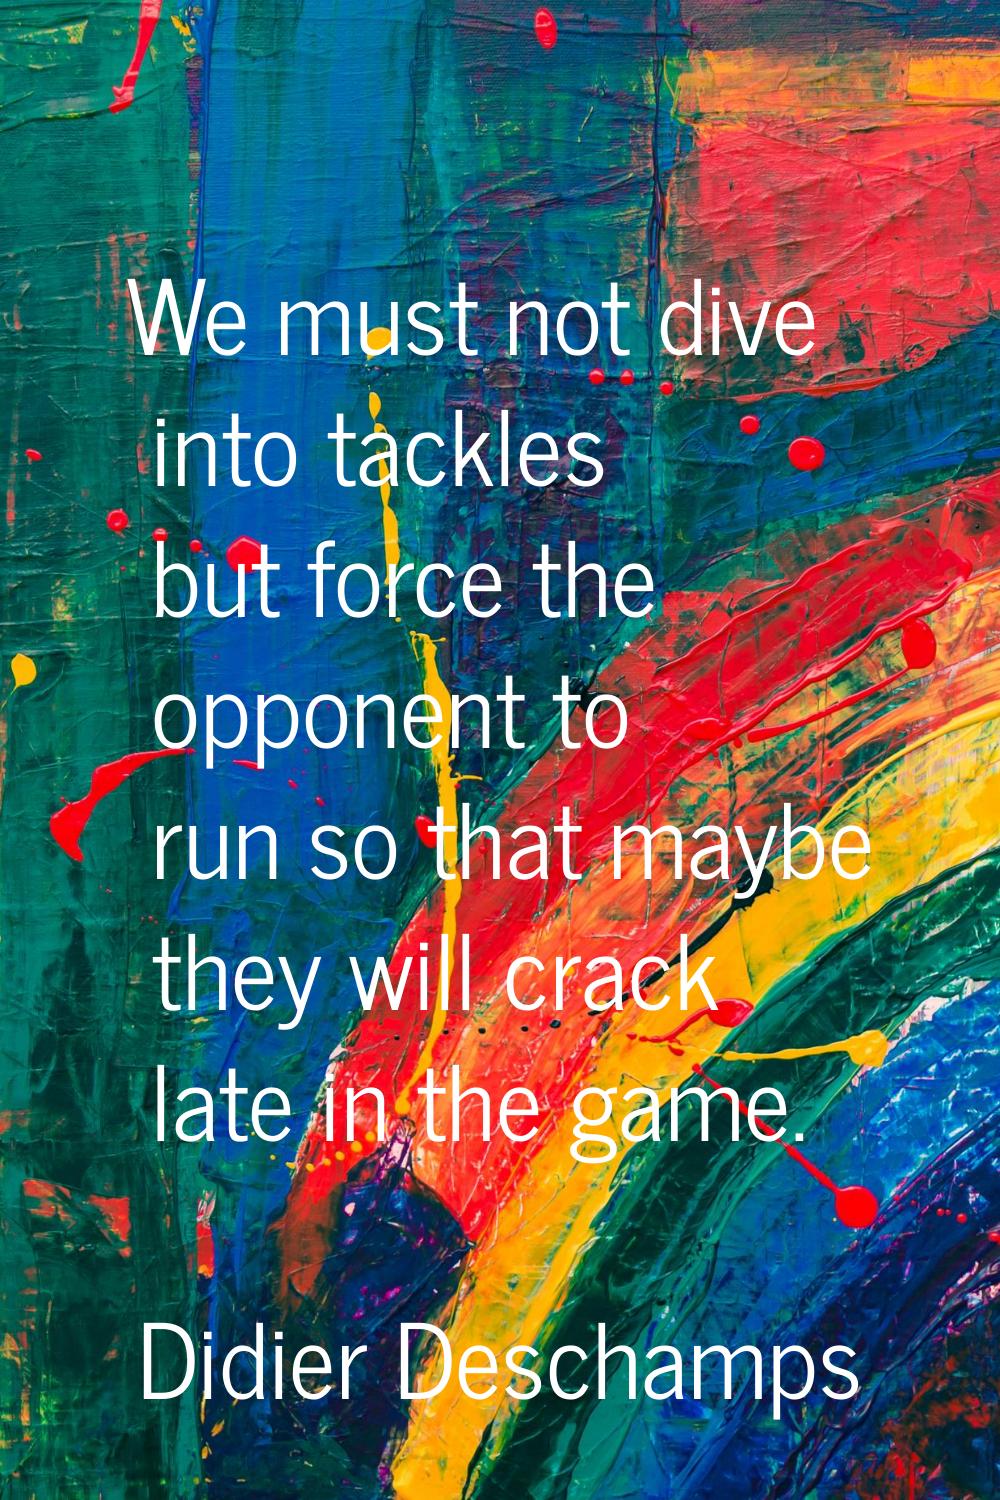 We must not dive into tackles but force the opponent to run so that maybe they will crack late in t